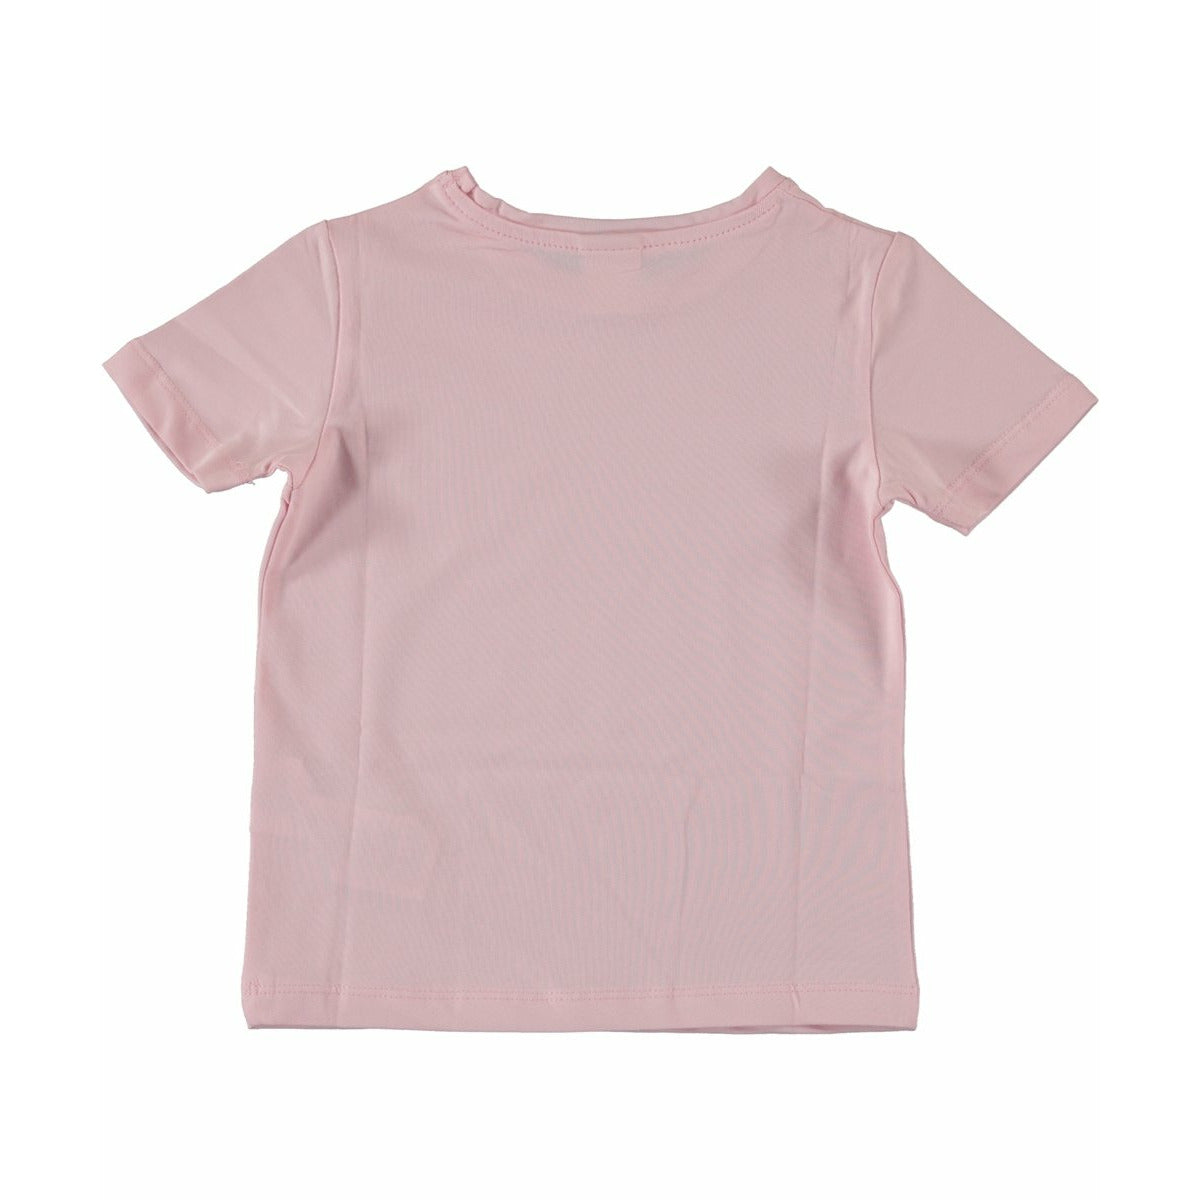 Style Junior - Baby T-Shirt Pink